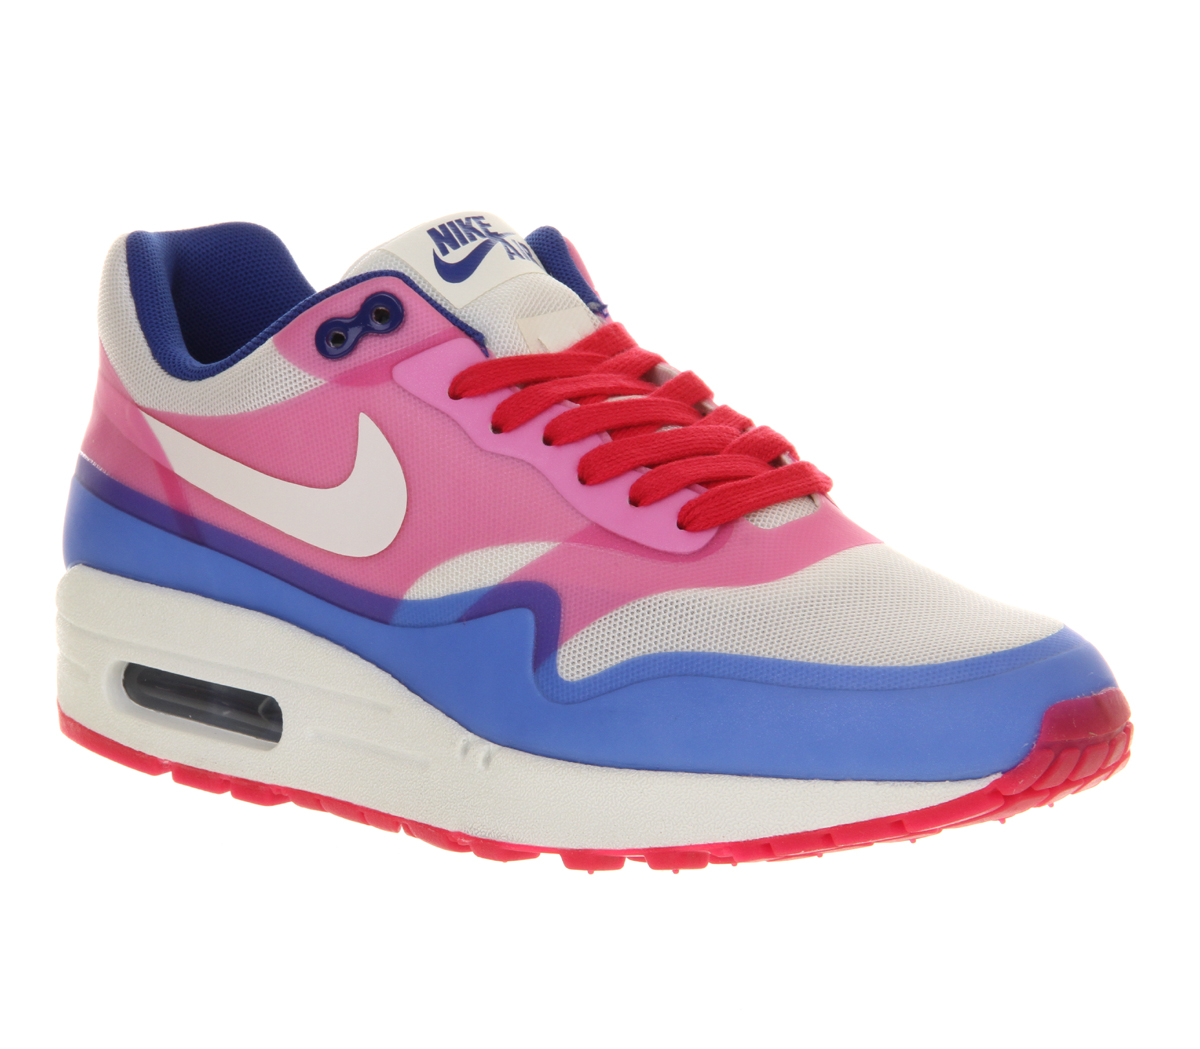 Lyst - Nike Air Max 1 L in Pink